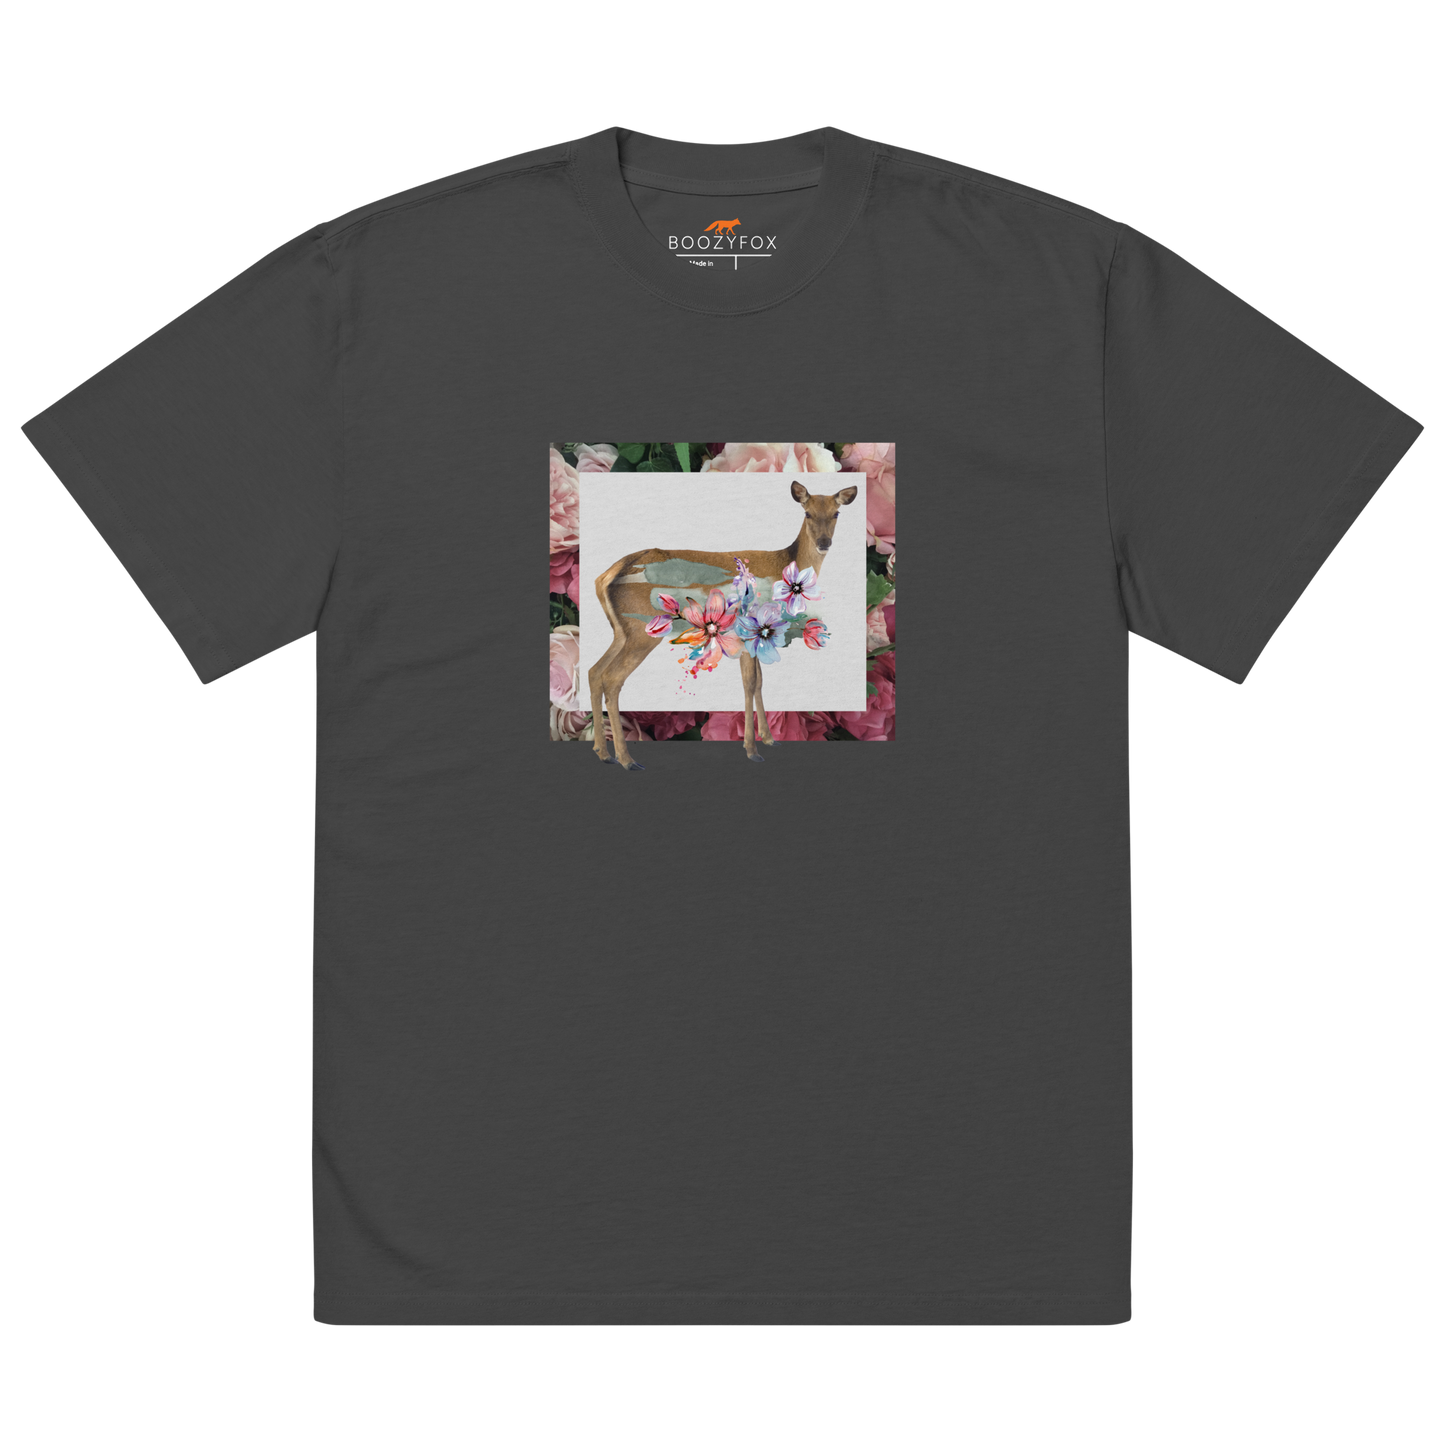 Faded Black Deer Oversized T-Shirt featuring a captivating Floral Deer graphic on the chest - Cute Graphic Deer Oversized Tees - Boozy Fox